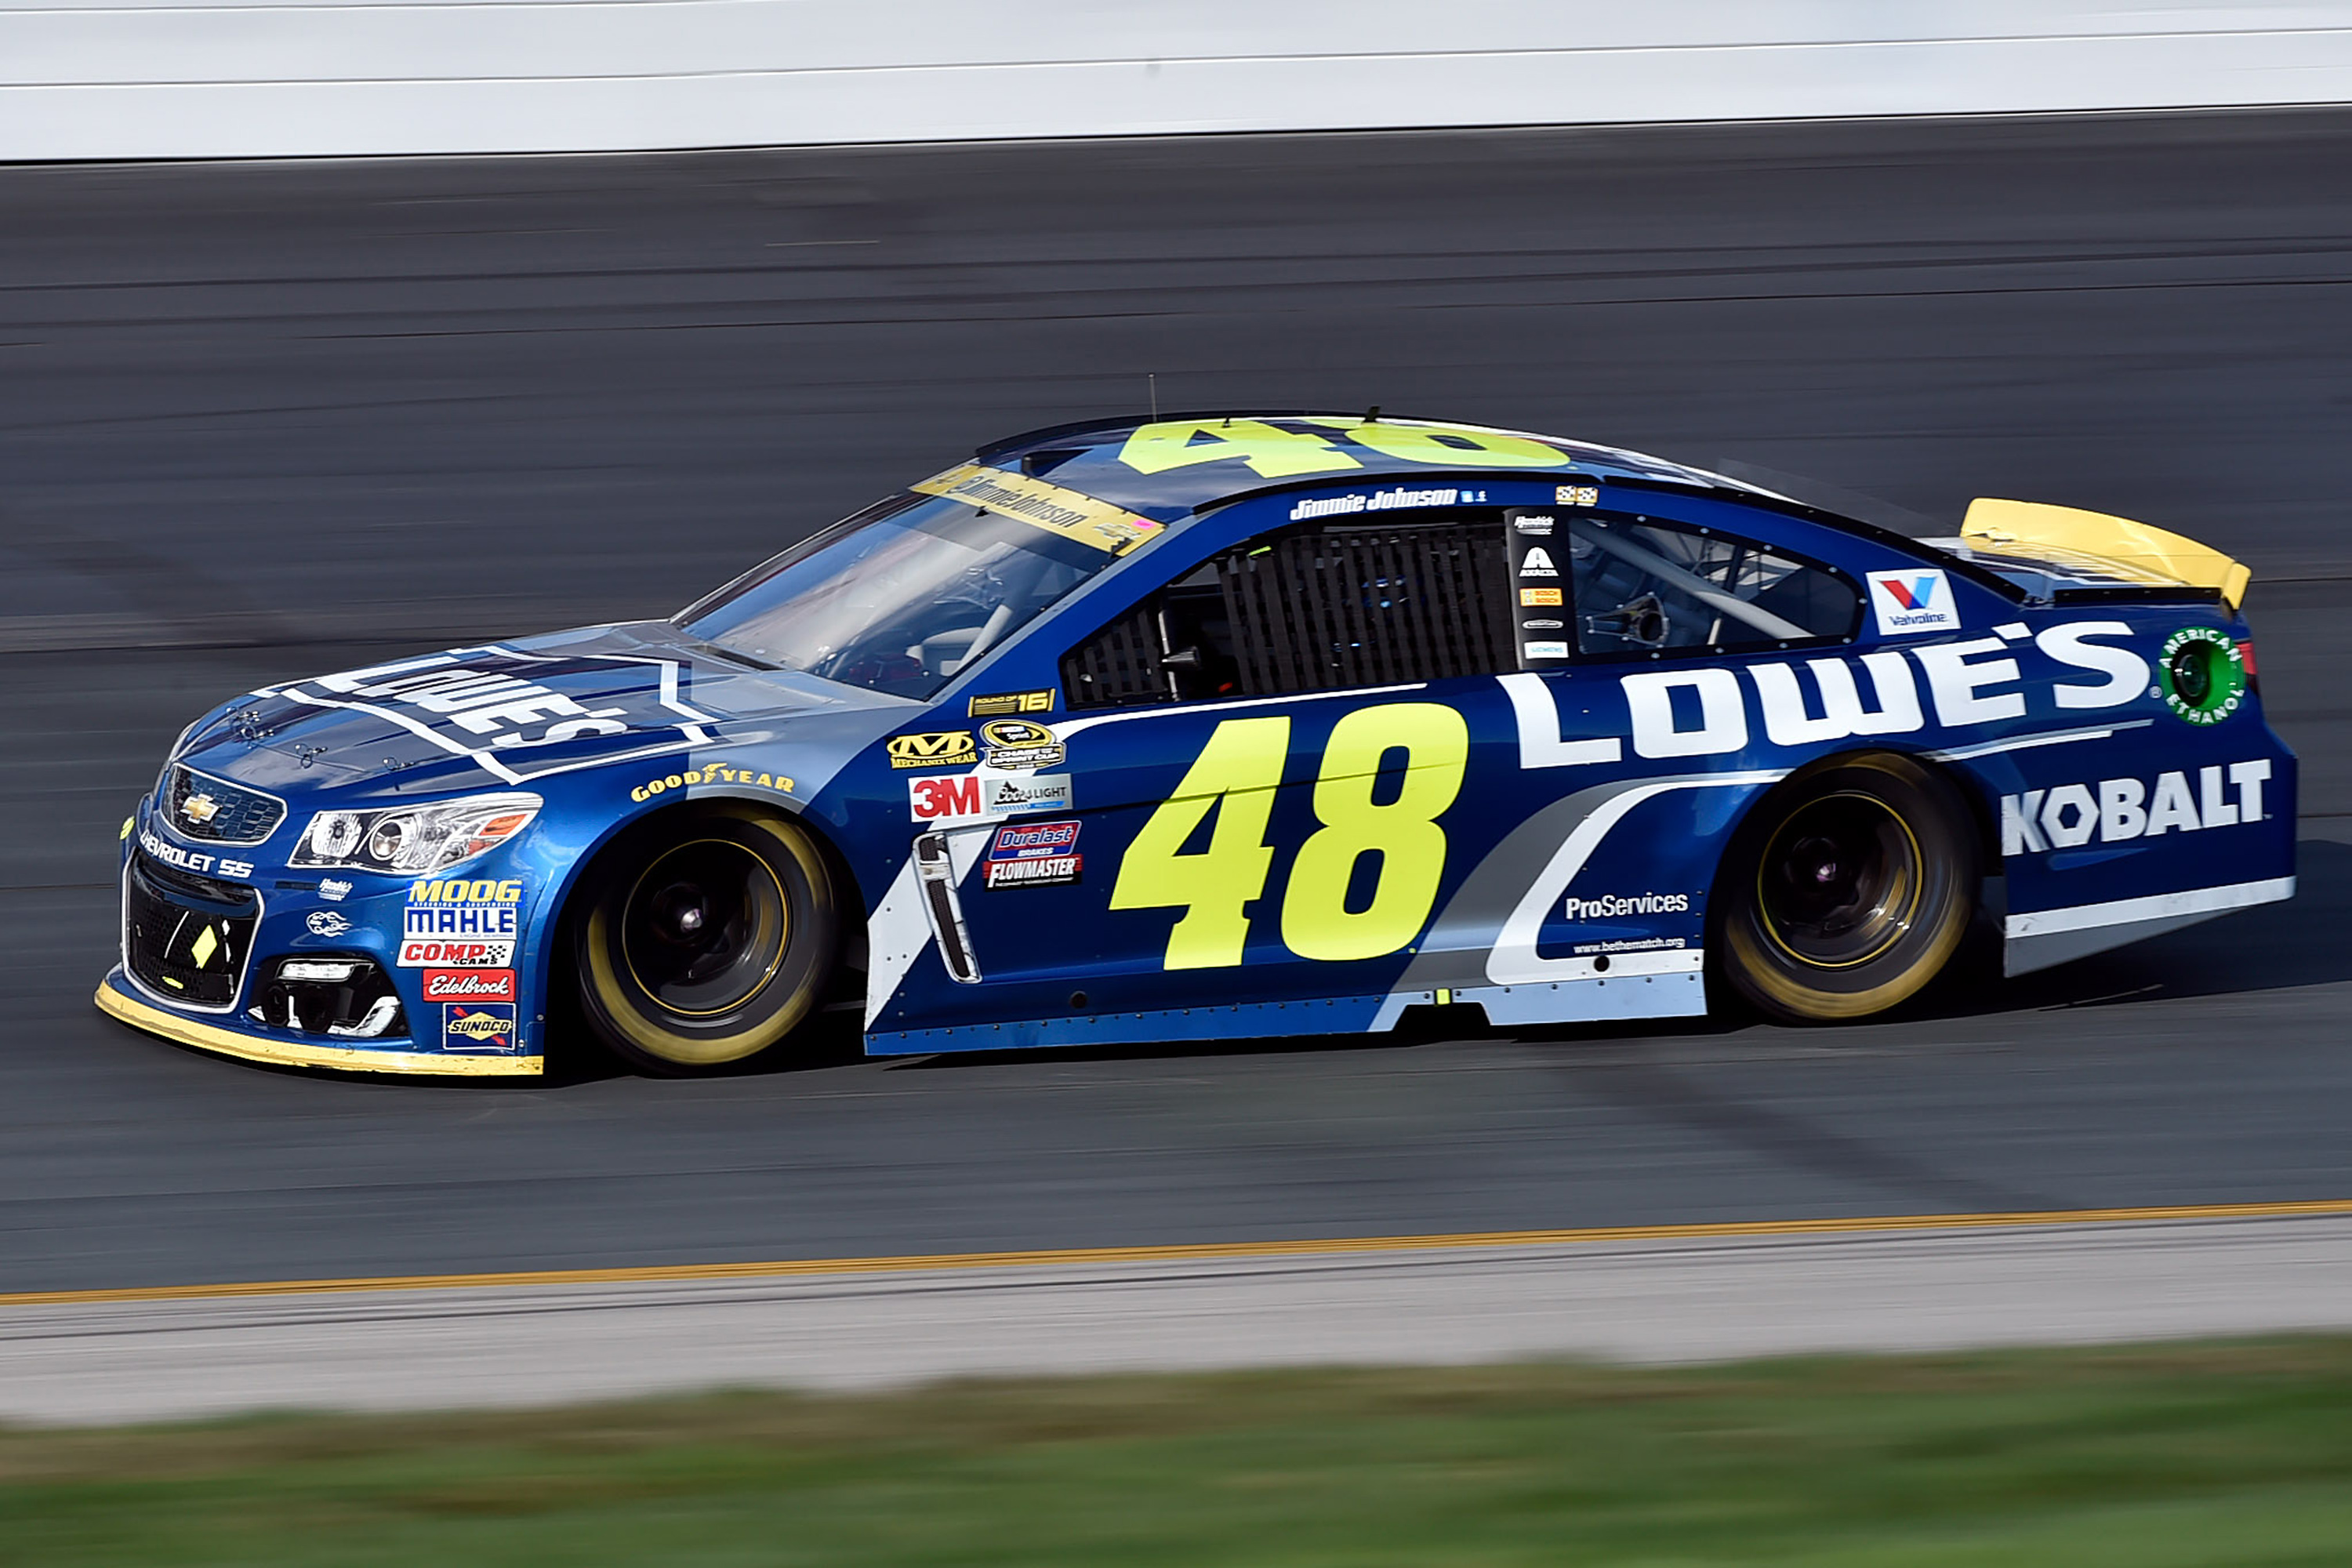 Jimmie Johnson wins his 7th NASCAR title wcnc